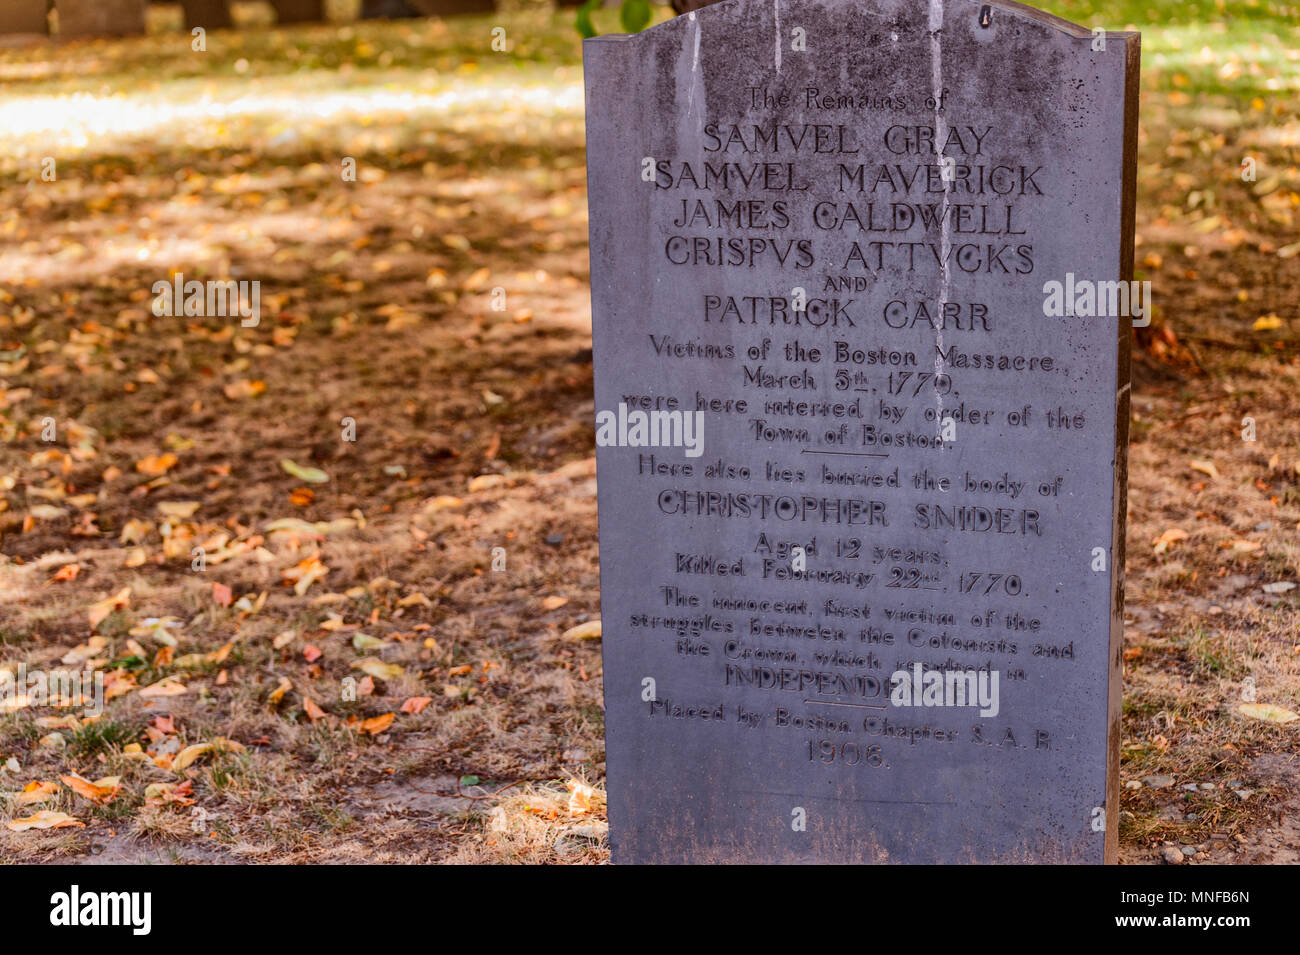 Boston, Massachusetts, USA - September 12, 2016:  A headstone for the five victims of the Boston Massacre, March 1770 Granary Burial Ground became a c Stock Photo